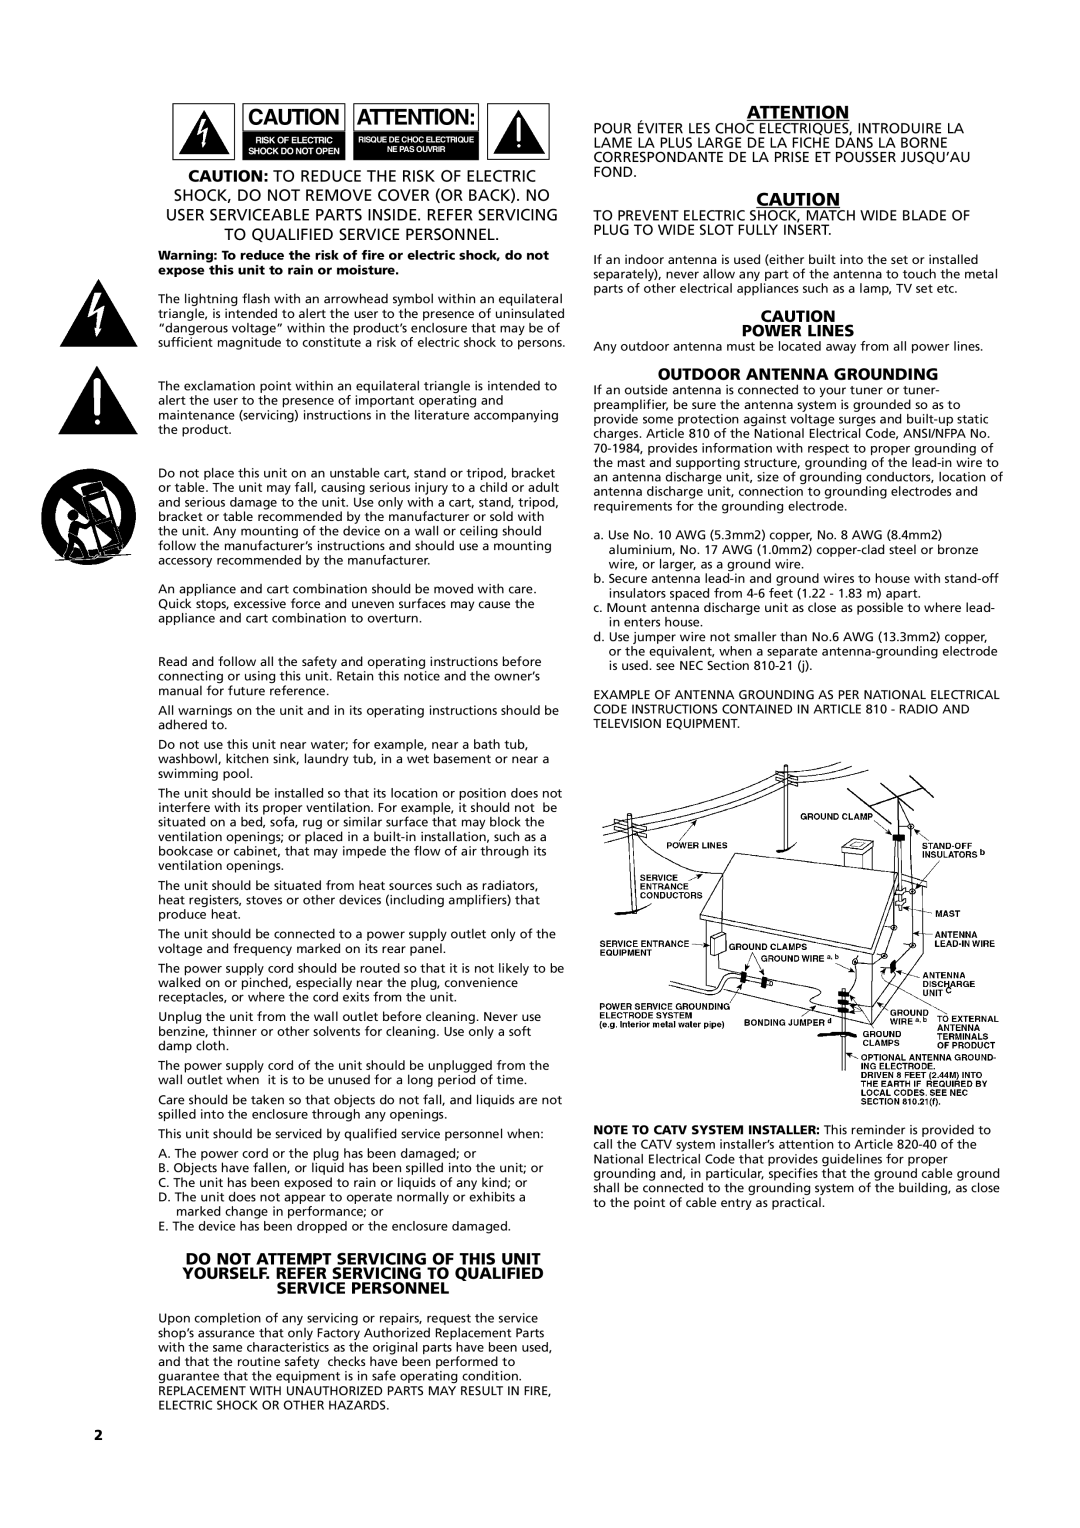 NAD C 372 Important Safety Instructions, Caution: To Reduce The Risk Of Electric, Power Lines, Outdoor Antenna Grounding 